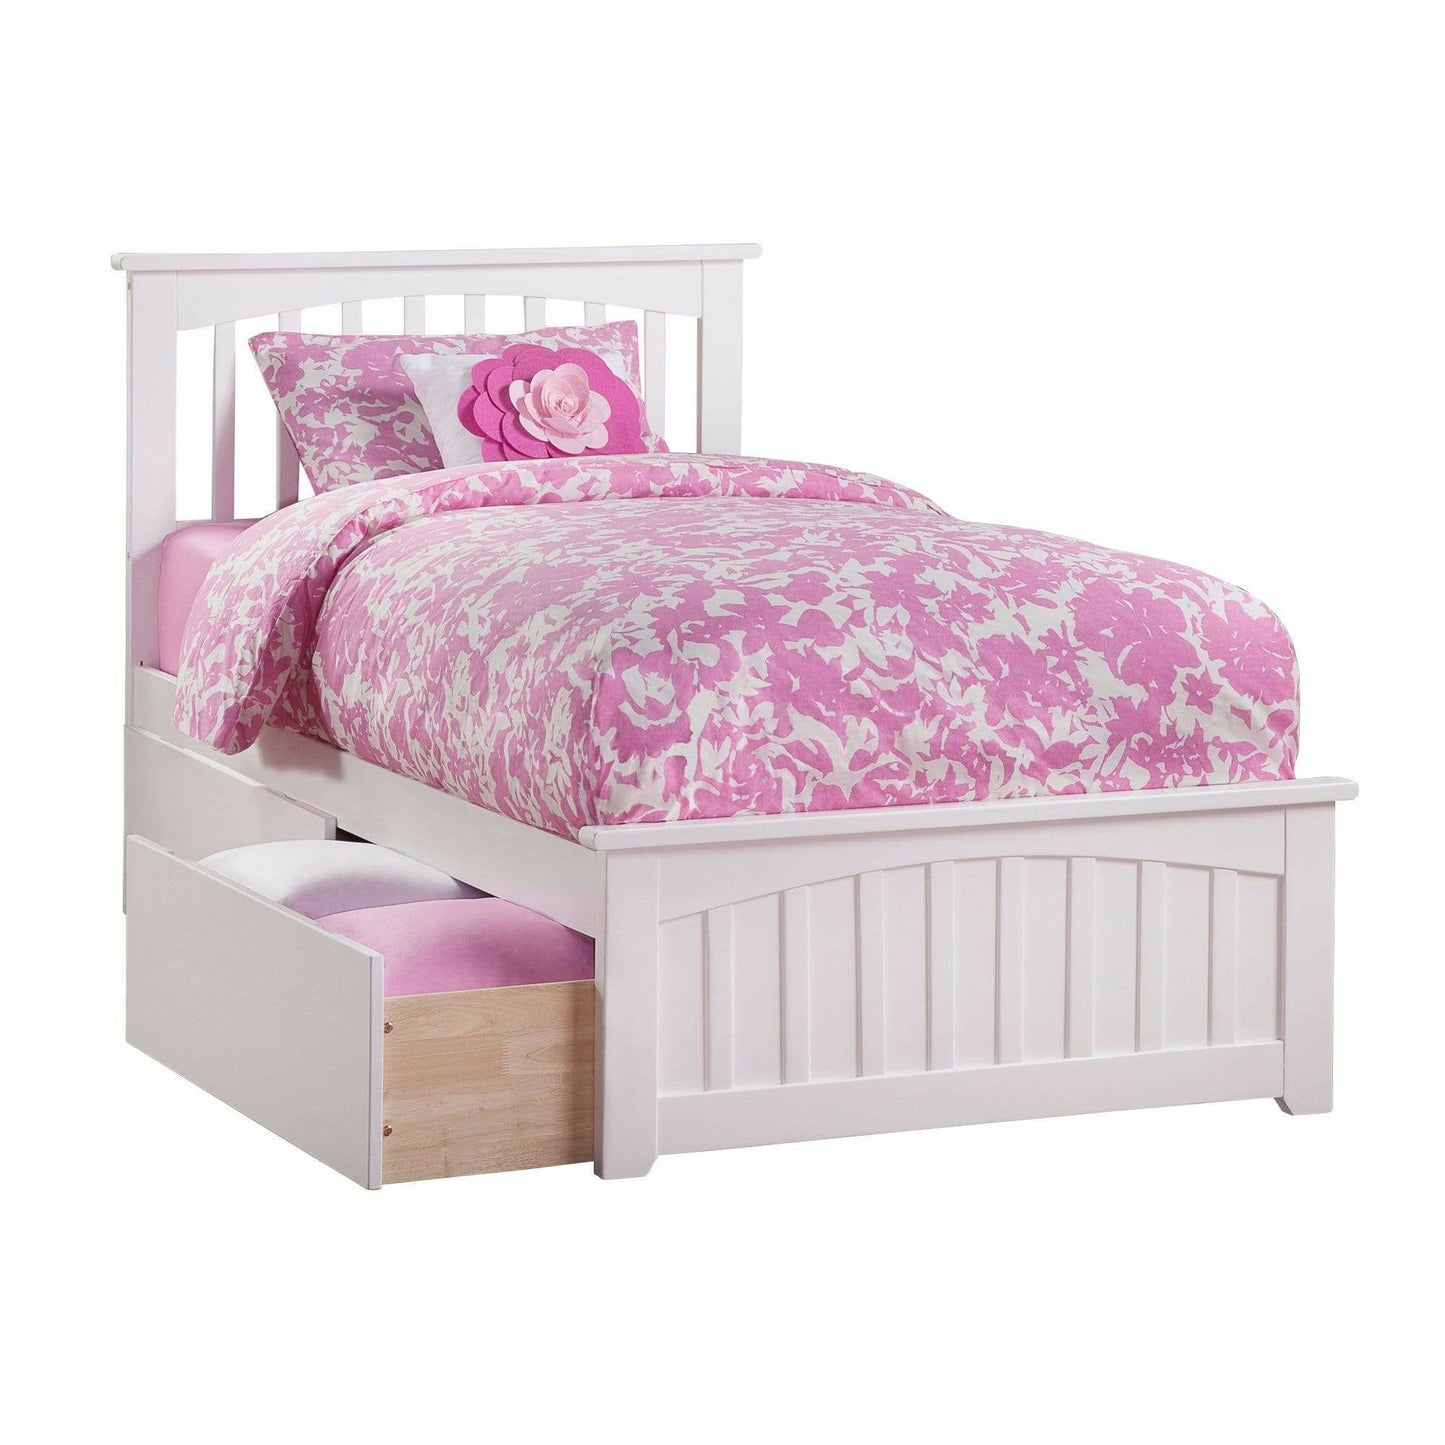 Atlantic Furniture Bed White Mission Twin XL Platform Bed with Matching Foot Board with 2 Urban Bed Drawers in White